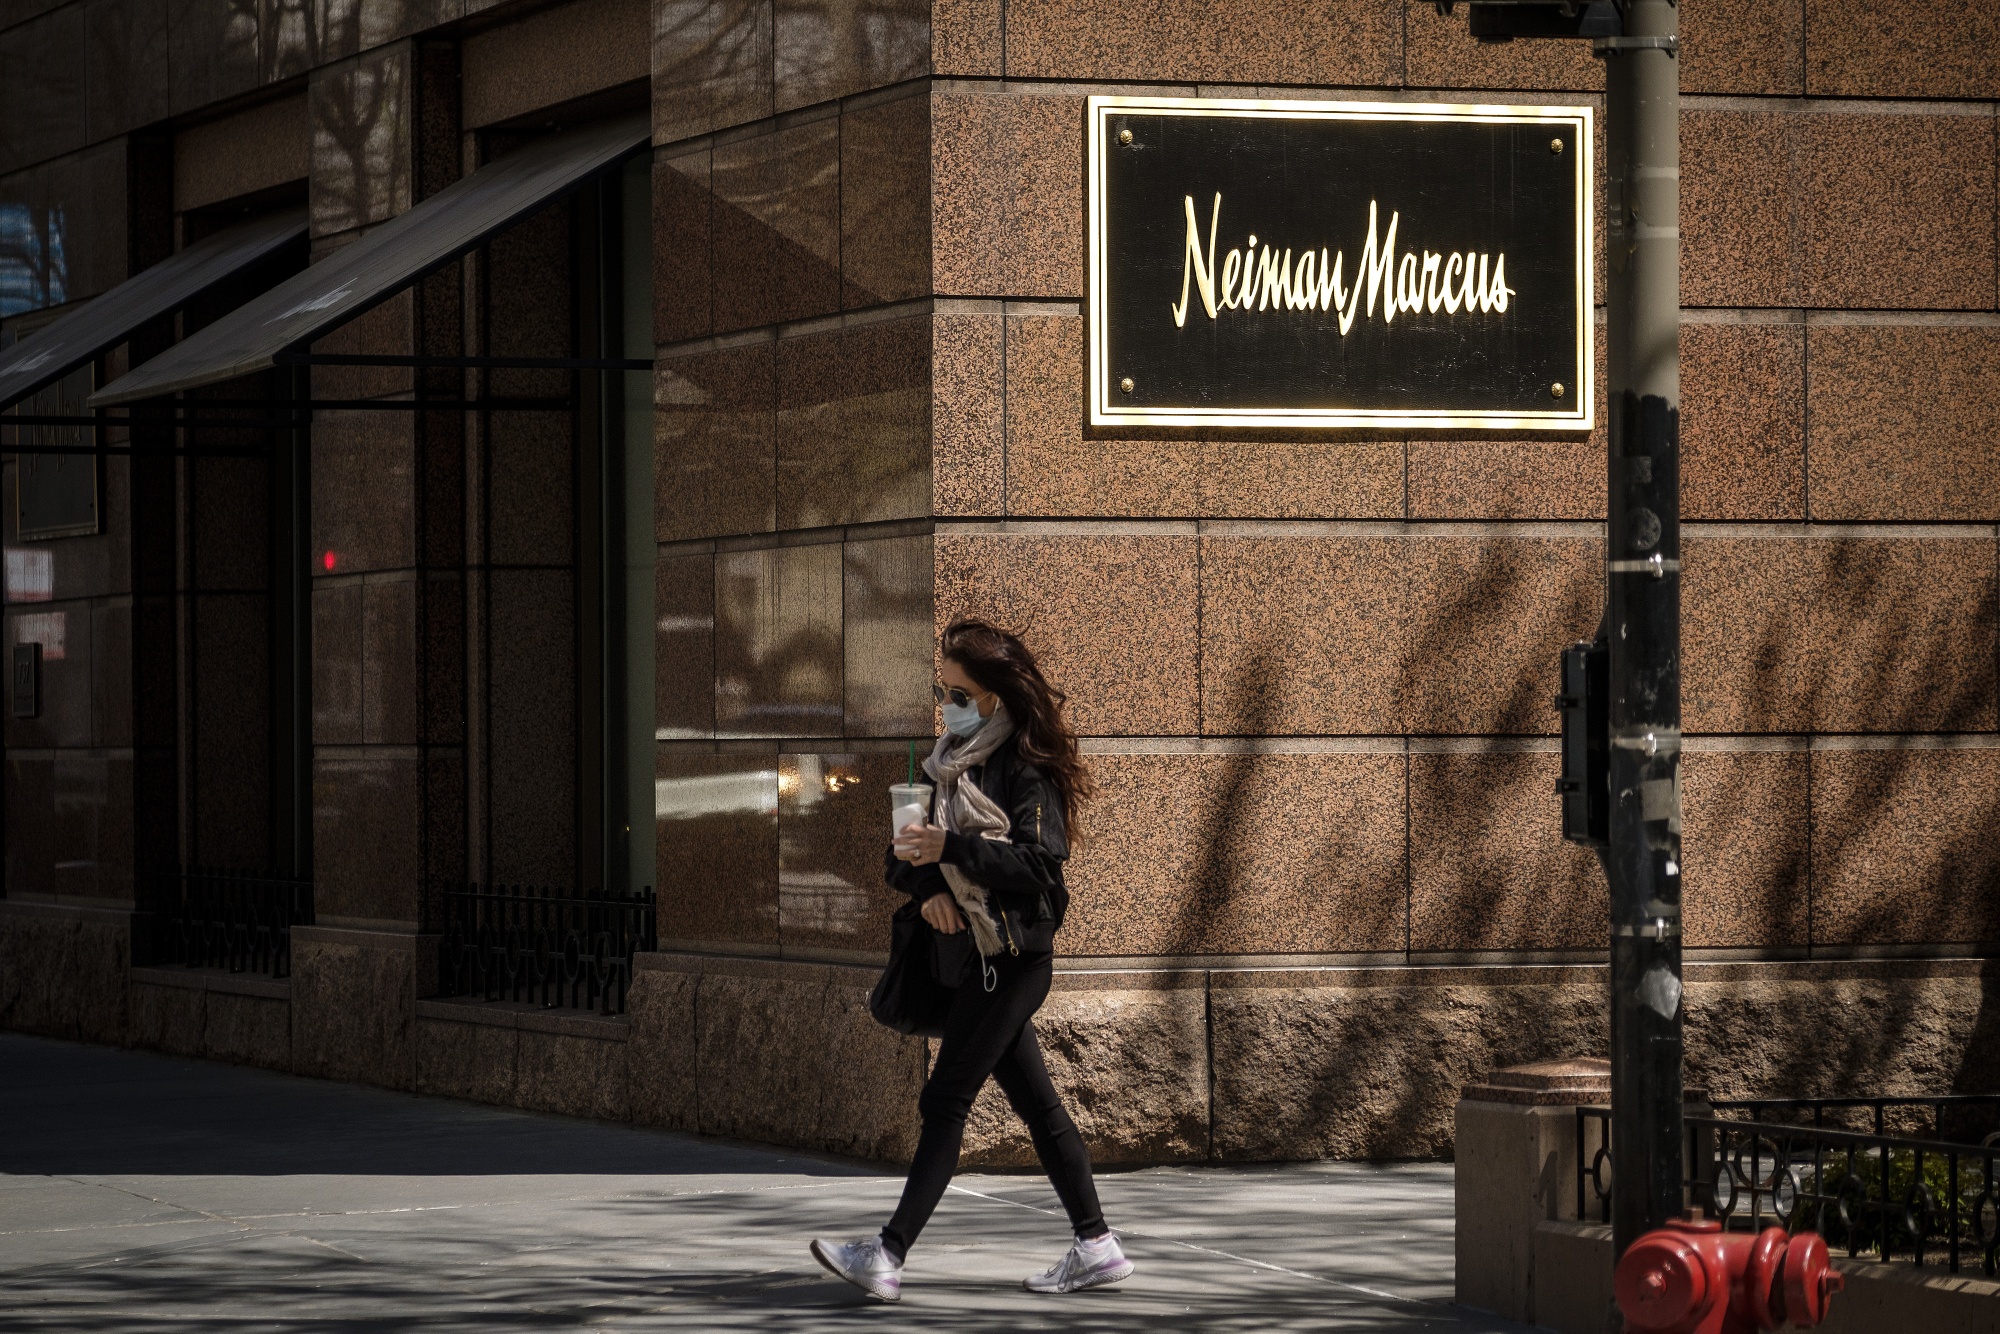 Hedge Fund Marble Ridge To Shut After Neiman Marcus Blowup - Bloomberg